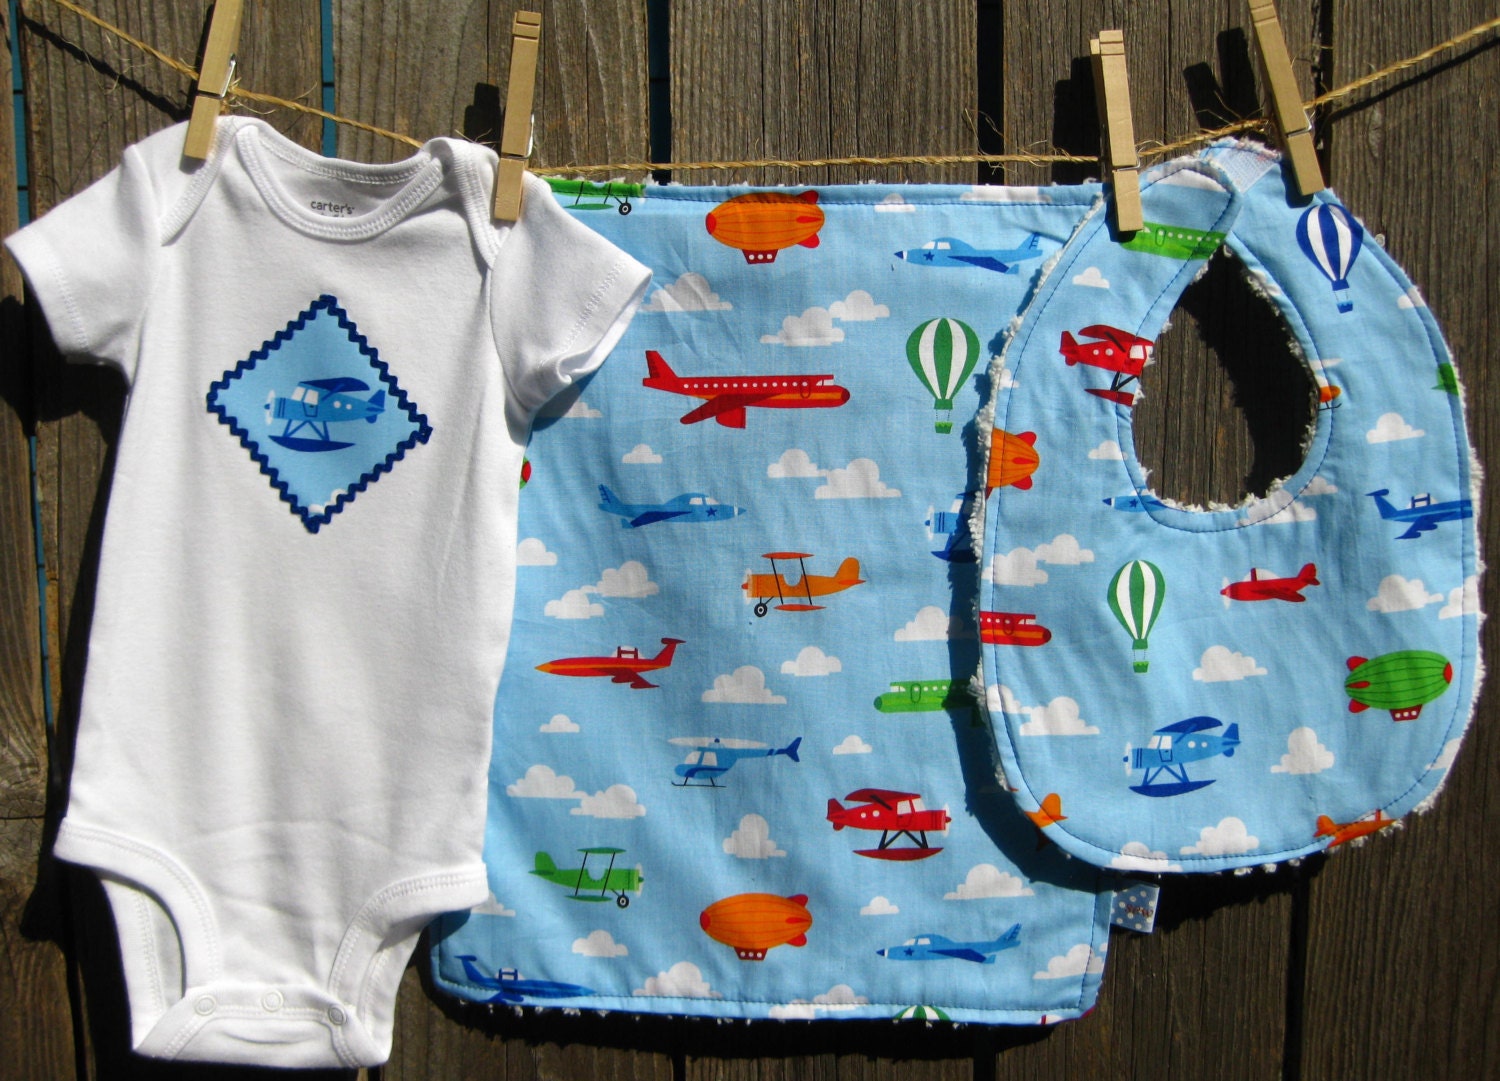 Planes, Blimps and Balloons --- Baby gift set with onesie, bib, burp cloth - available in size Newborn - 24 months